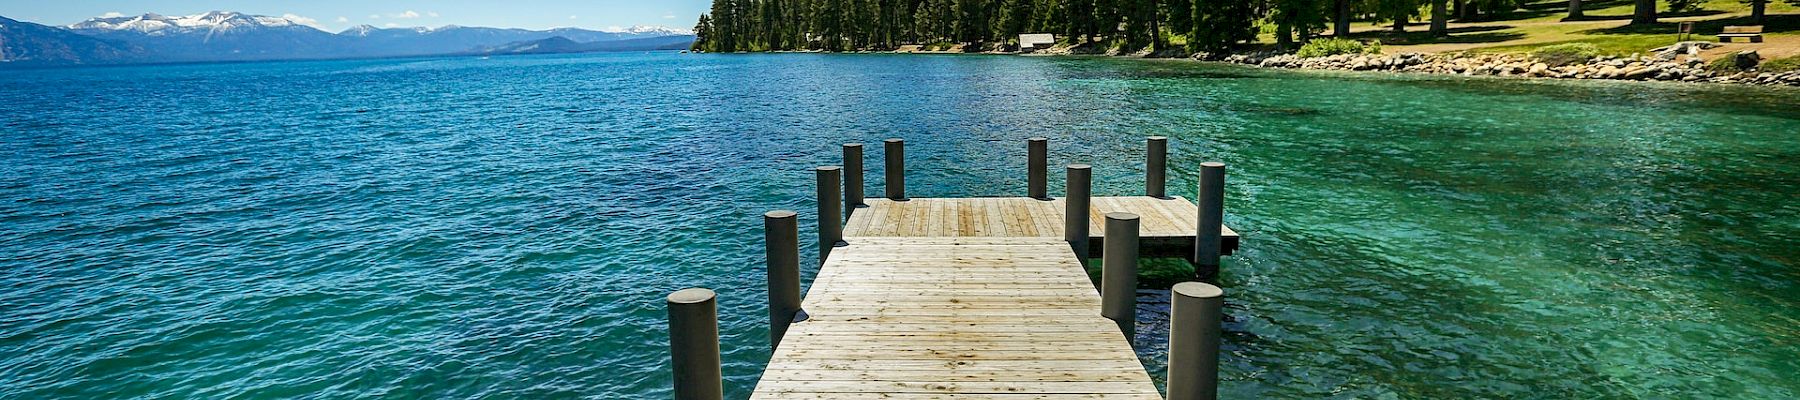 A wooden pier extends into a clear blue lake surrounded by tall pine trees on a sunny day, with mountains visible in the distance.